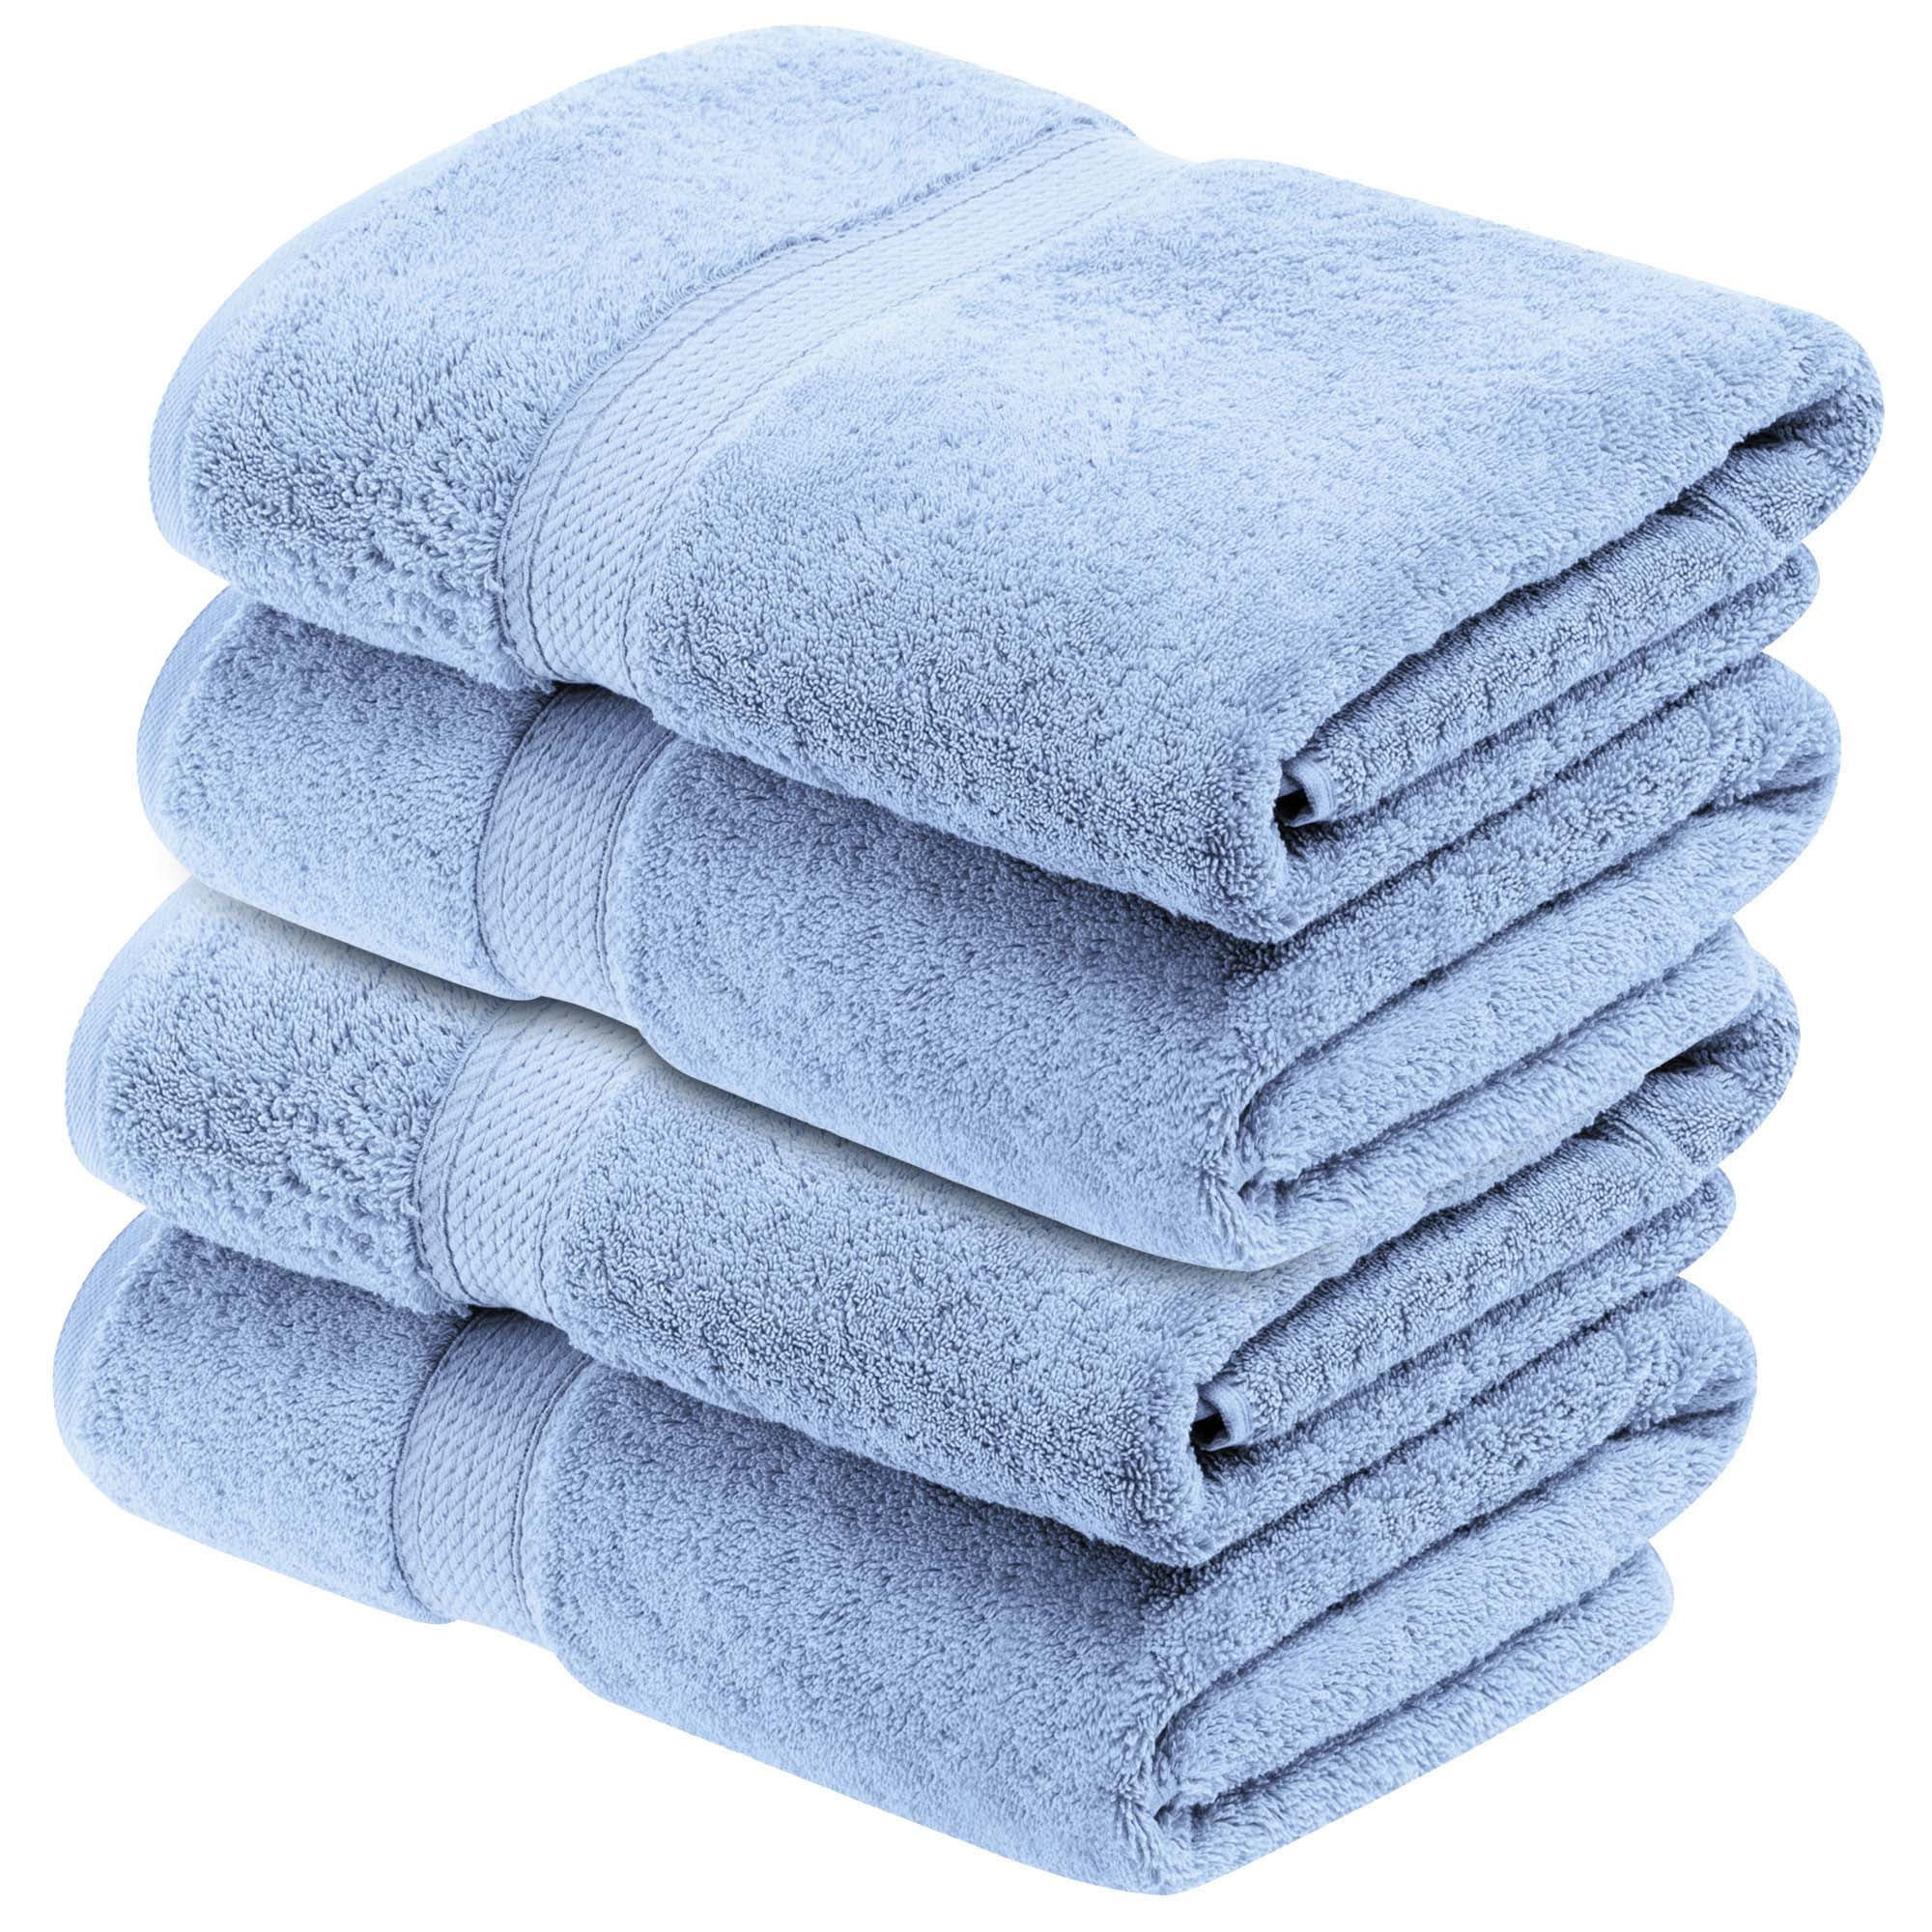 Egyptian Cotton 900 GSM Hotel Quality 3-Piece Towel Set, 1 Face, 1 Hand,  and 1 Bath Navy Blue